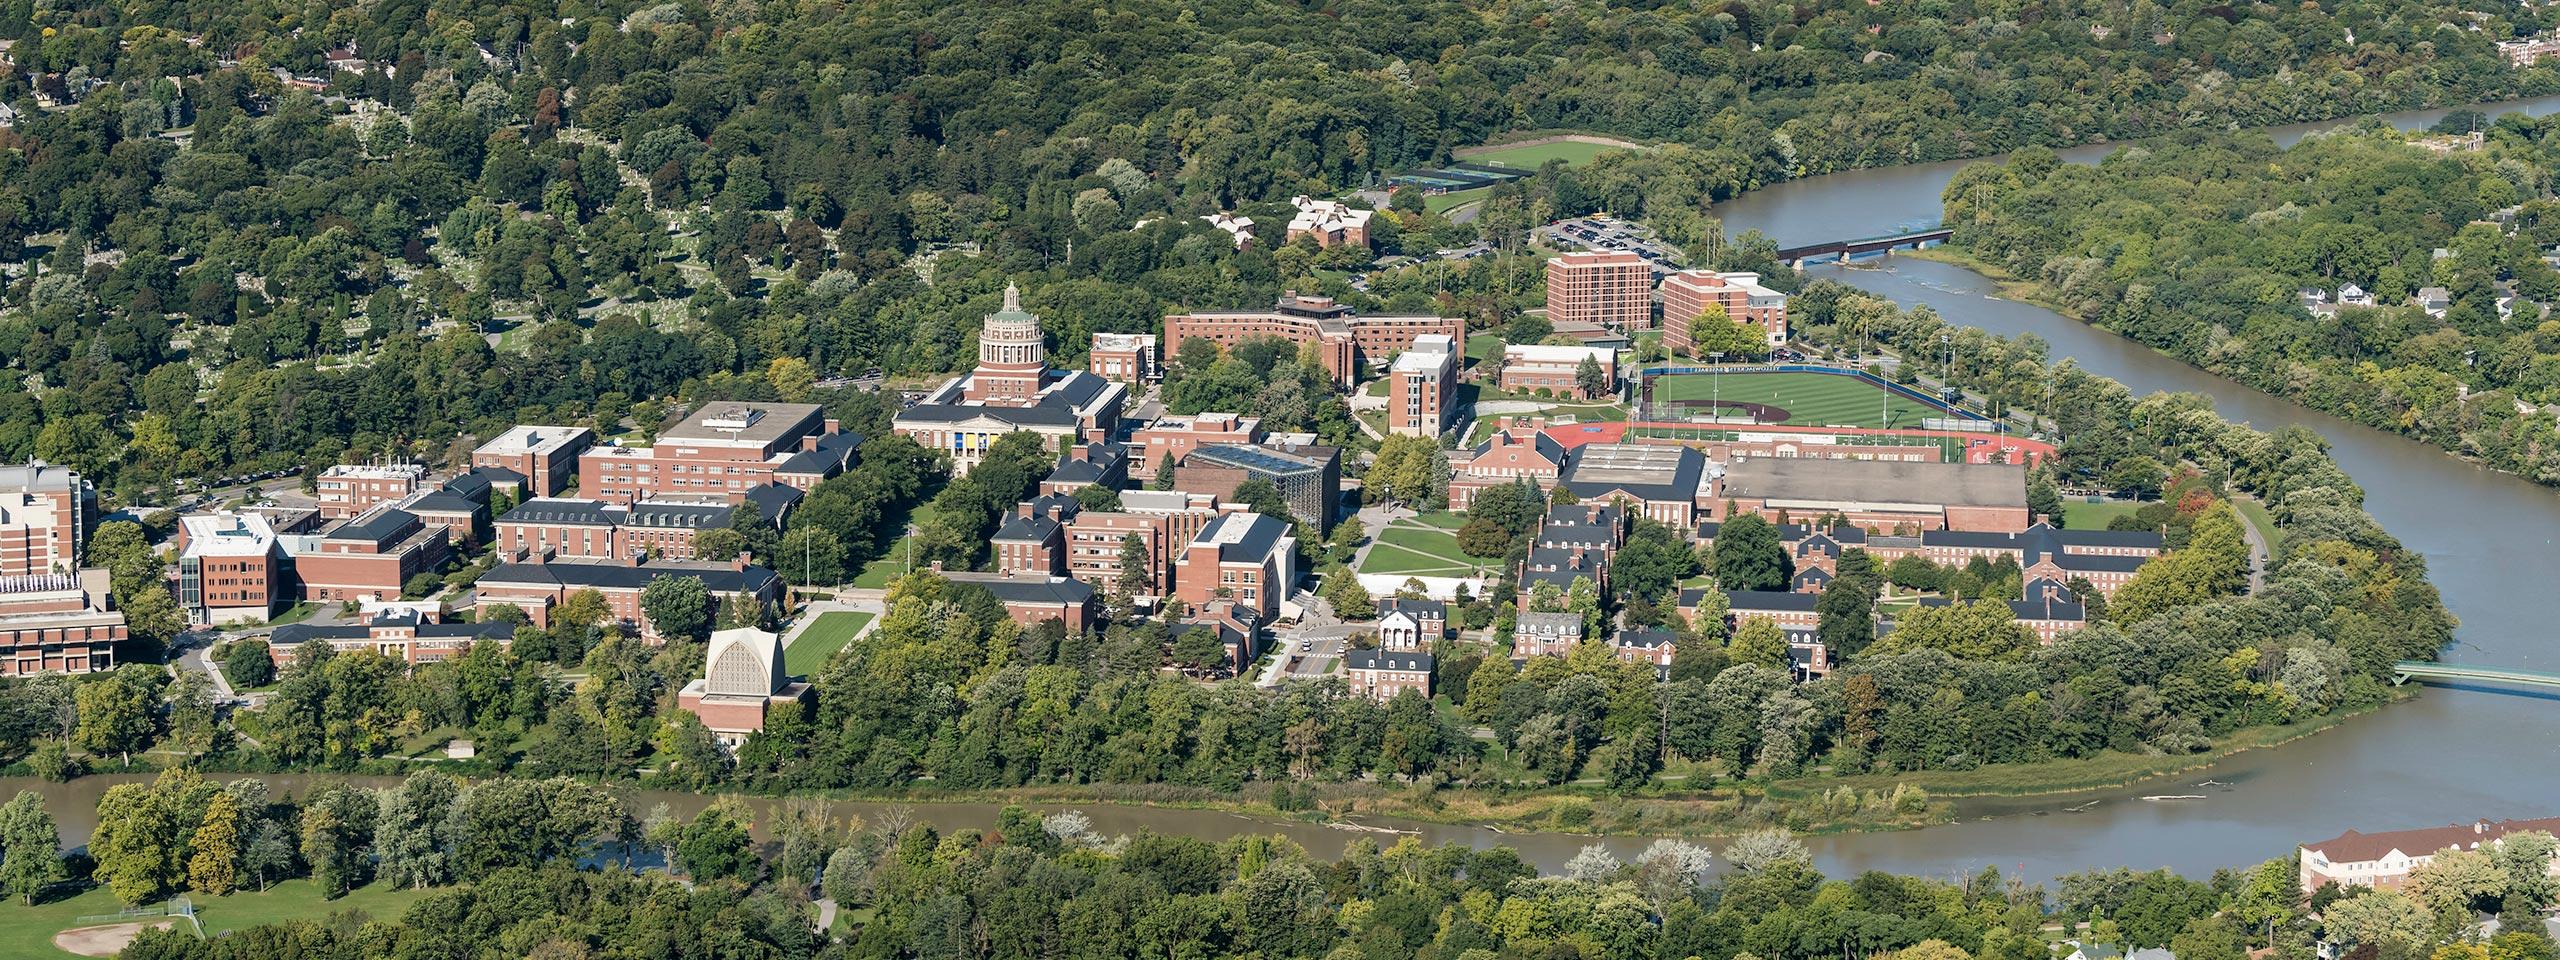 An aerial view of the University of Rochester River Campus.